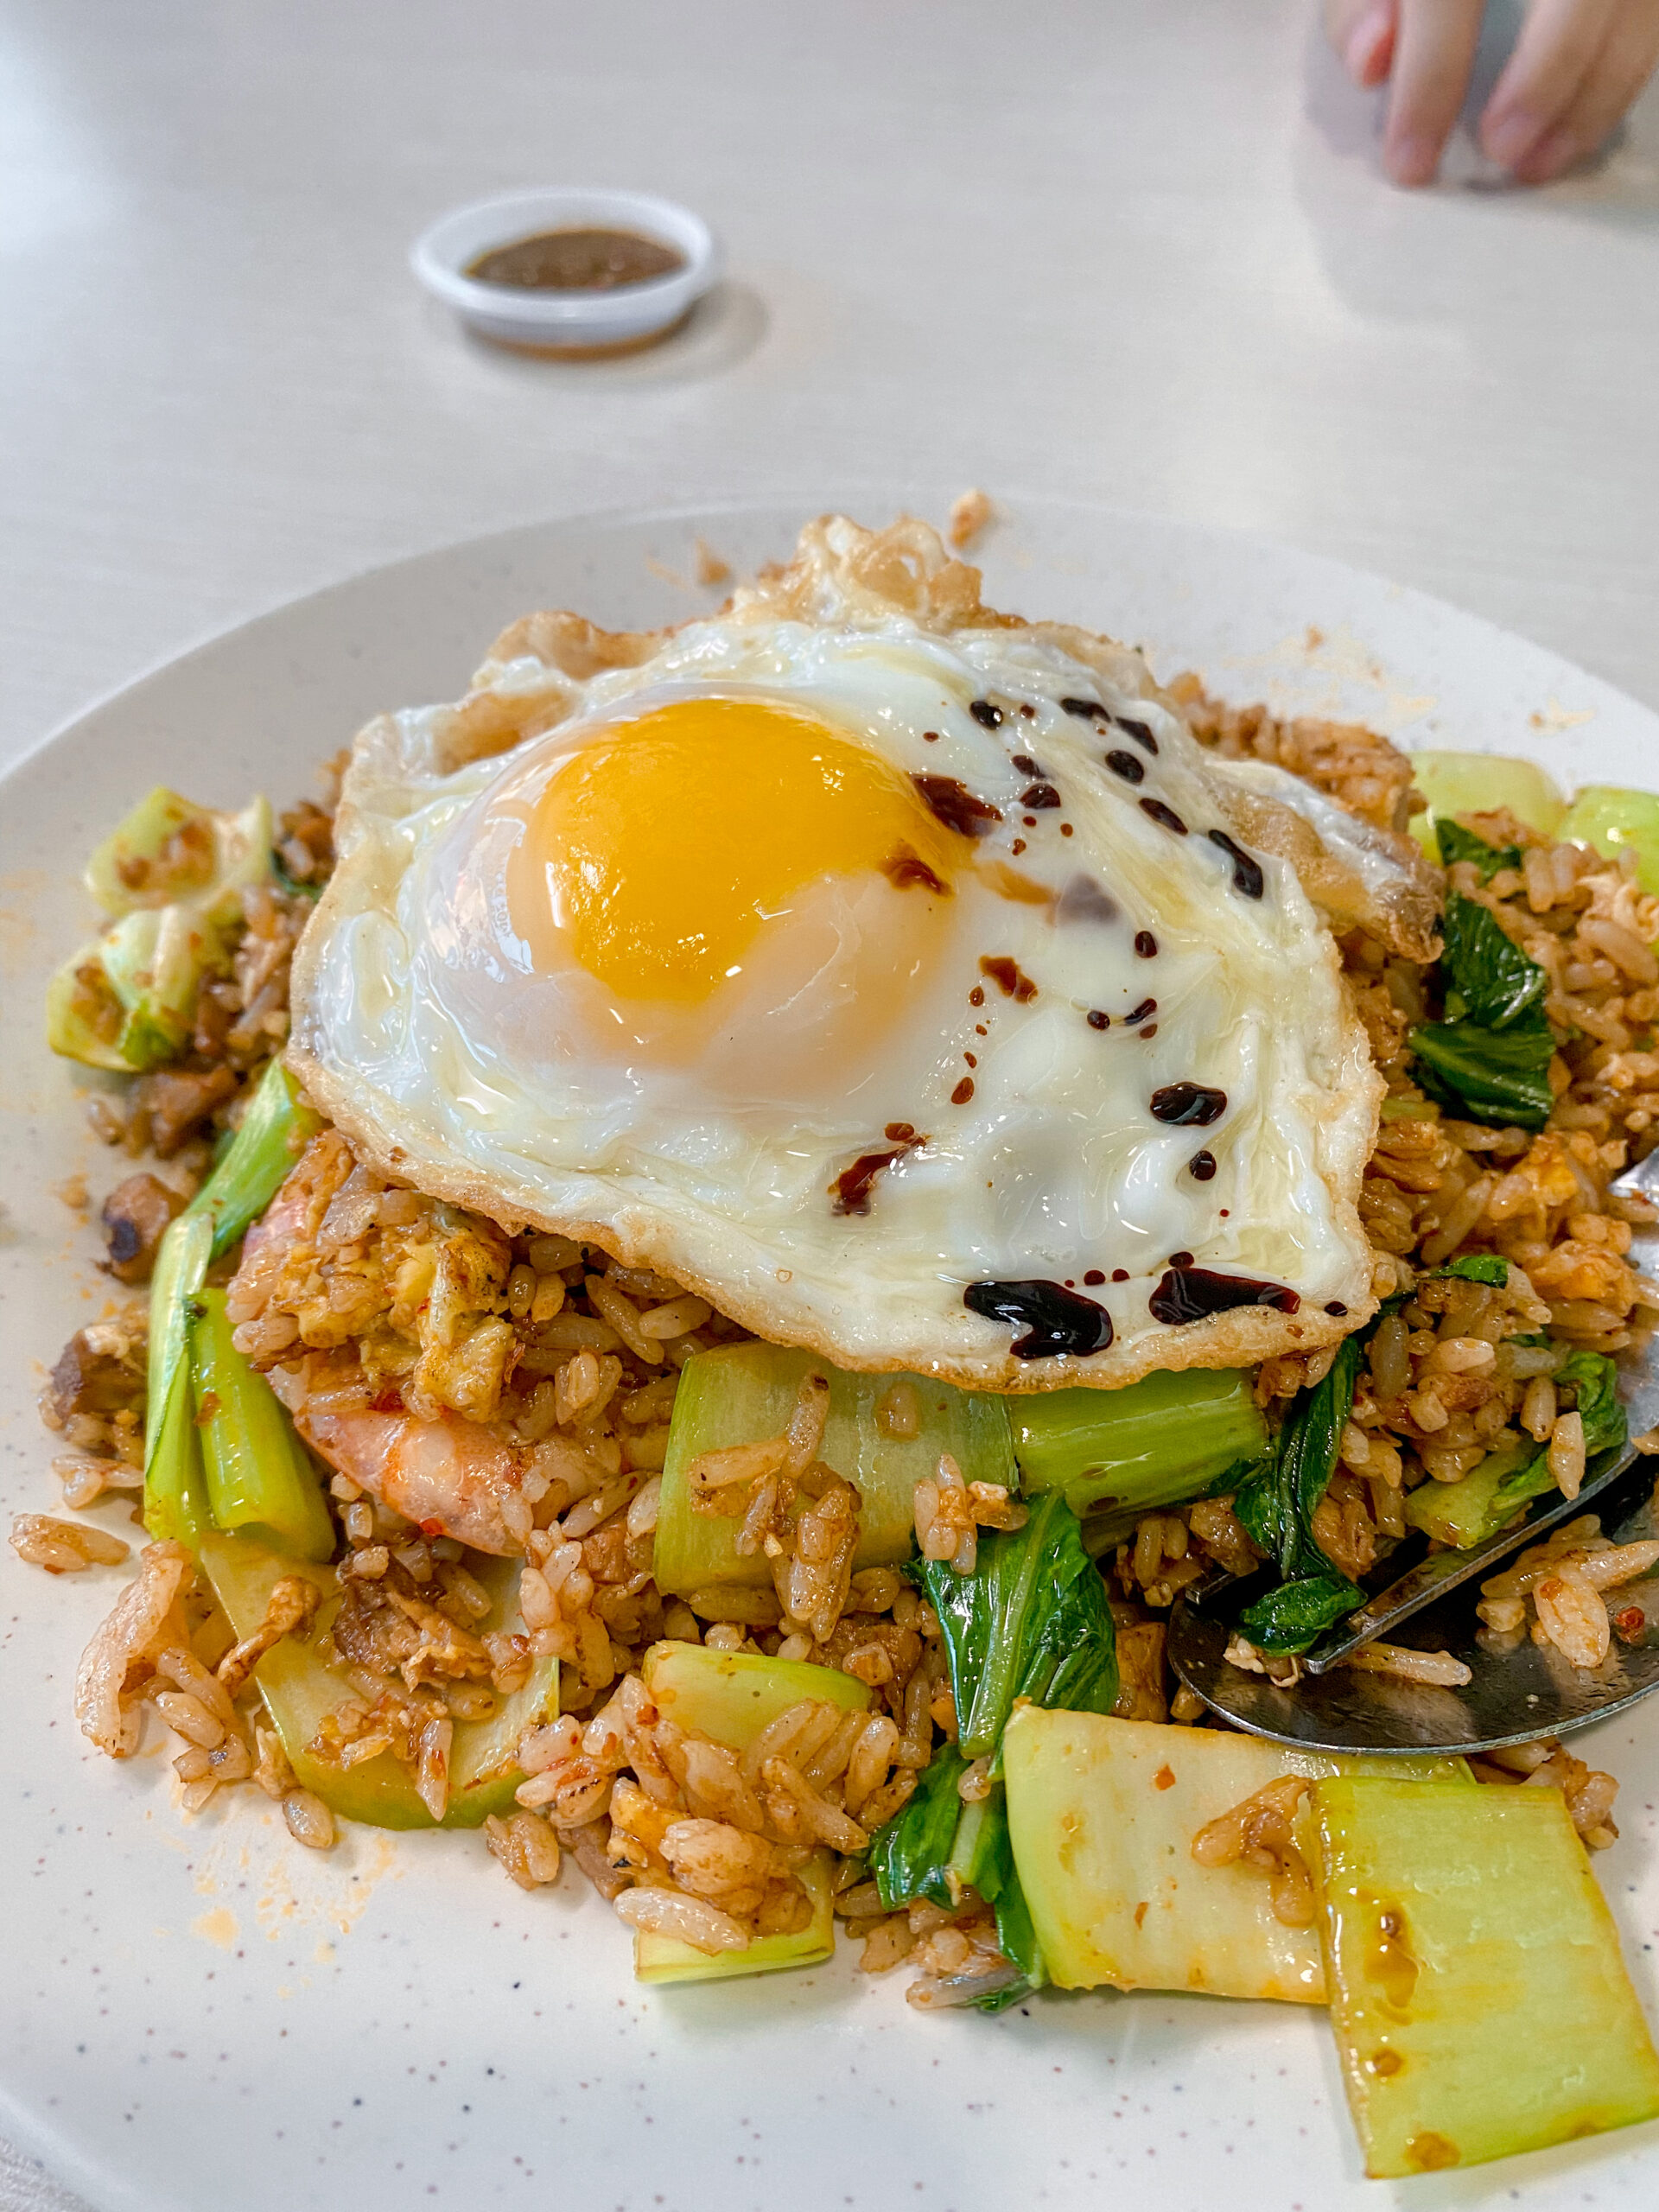 SS15's Uncle Soon nice or not one? We tried their Prawn and Char Siew Fried Rice